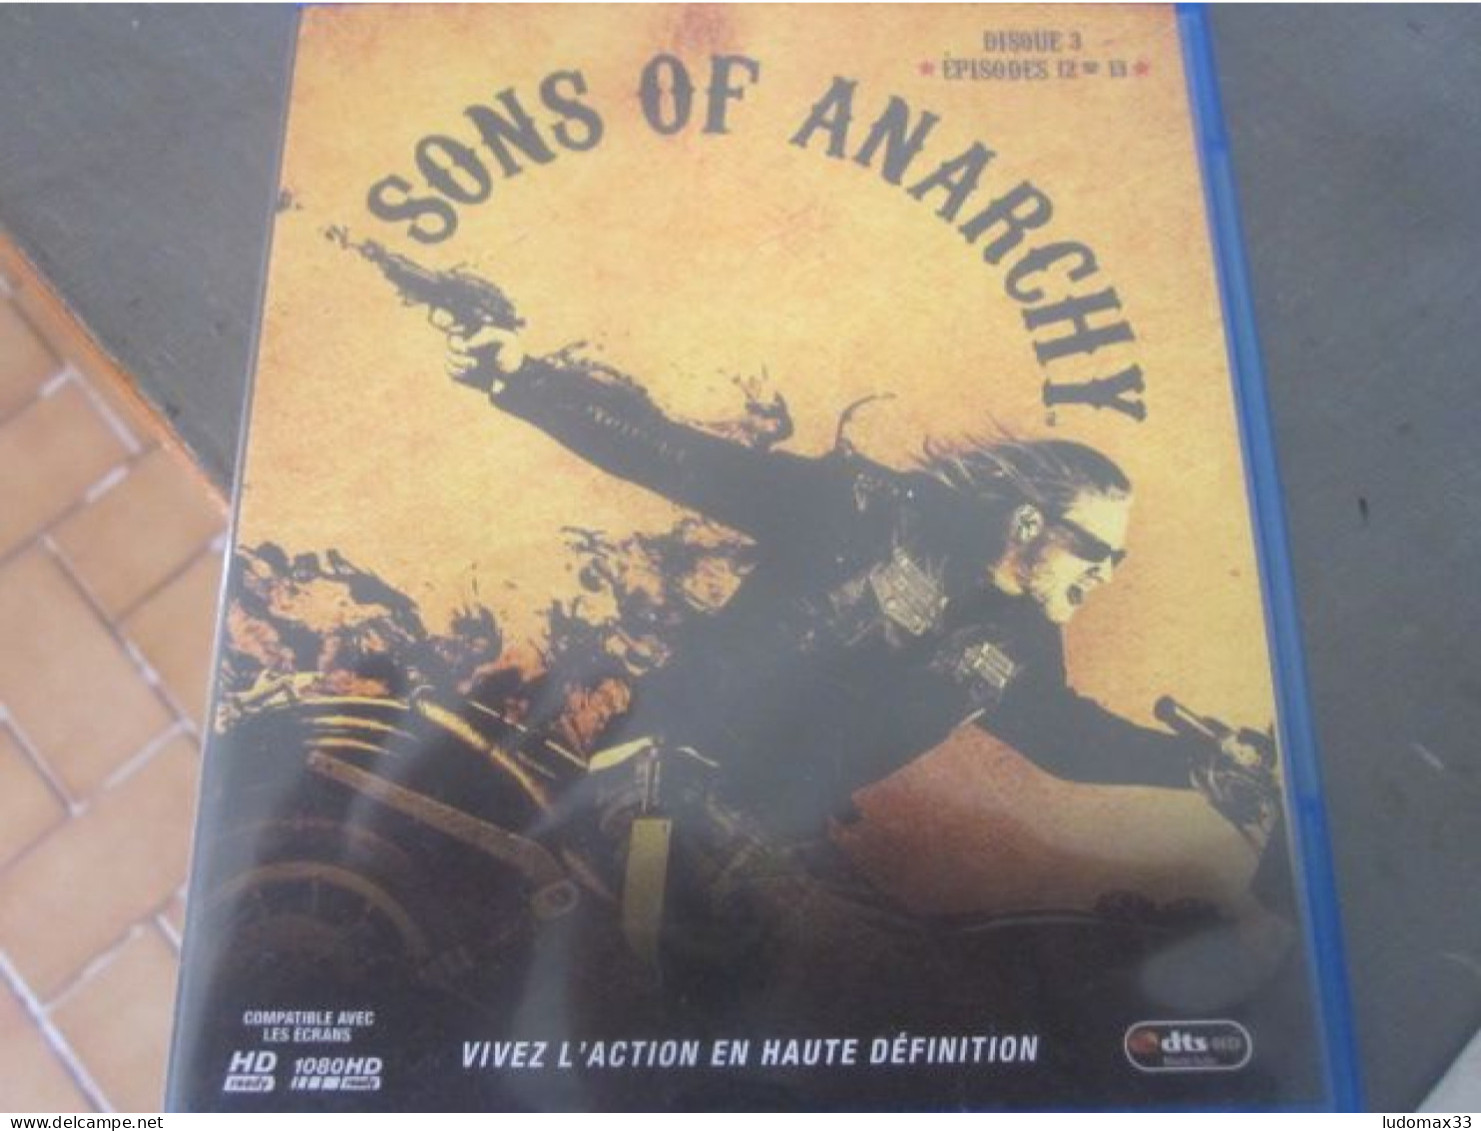 Sons Of Anarchy Disque 3 Episodes 12 13 - Action, Adventure